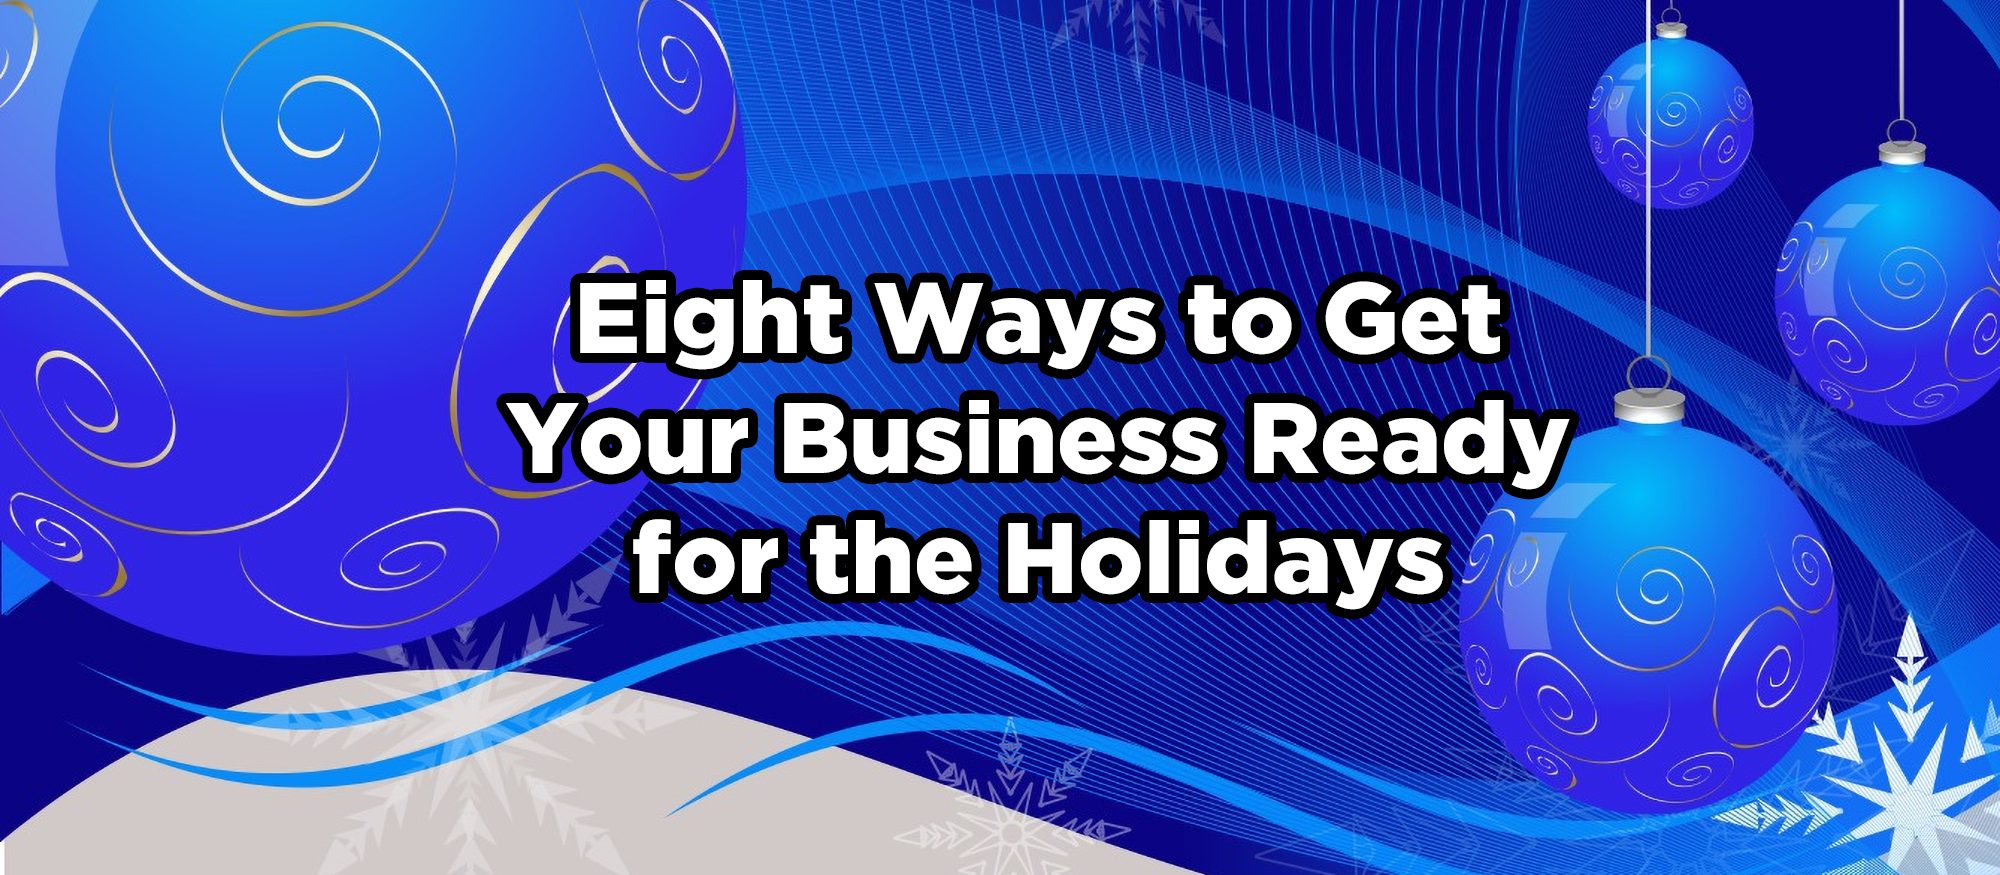 Blue holiday design - text Eight Ways to Get Your Business Ready for the Holidays